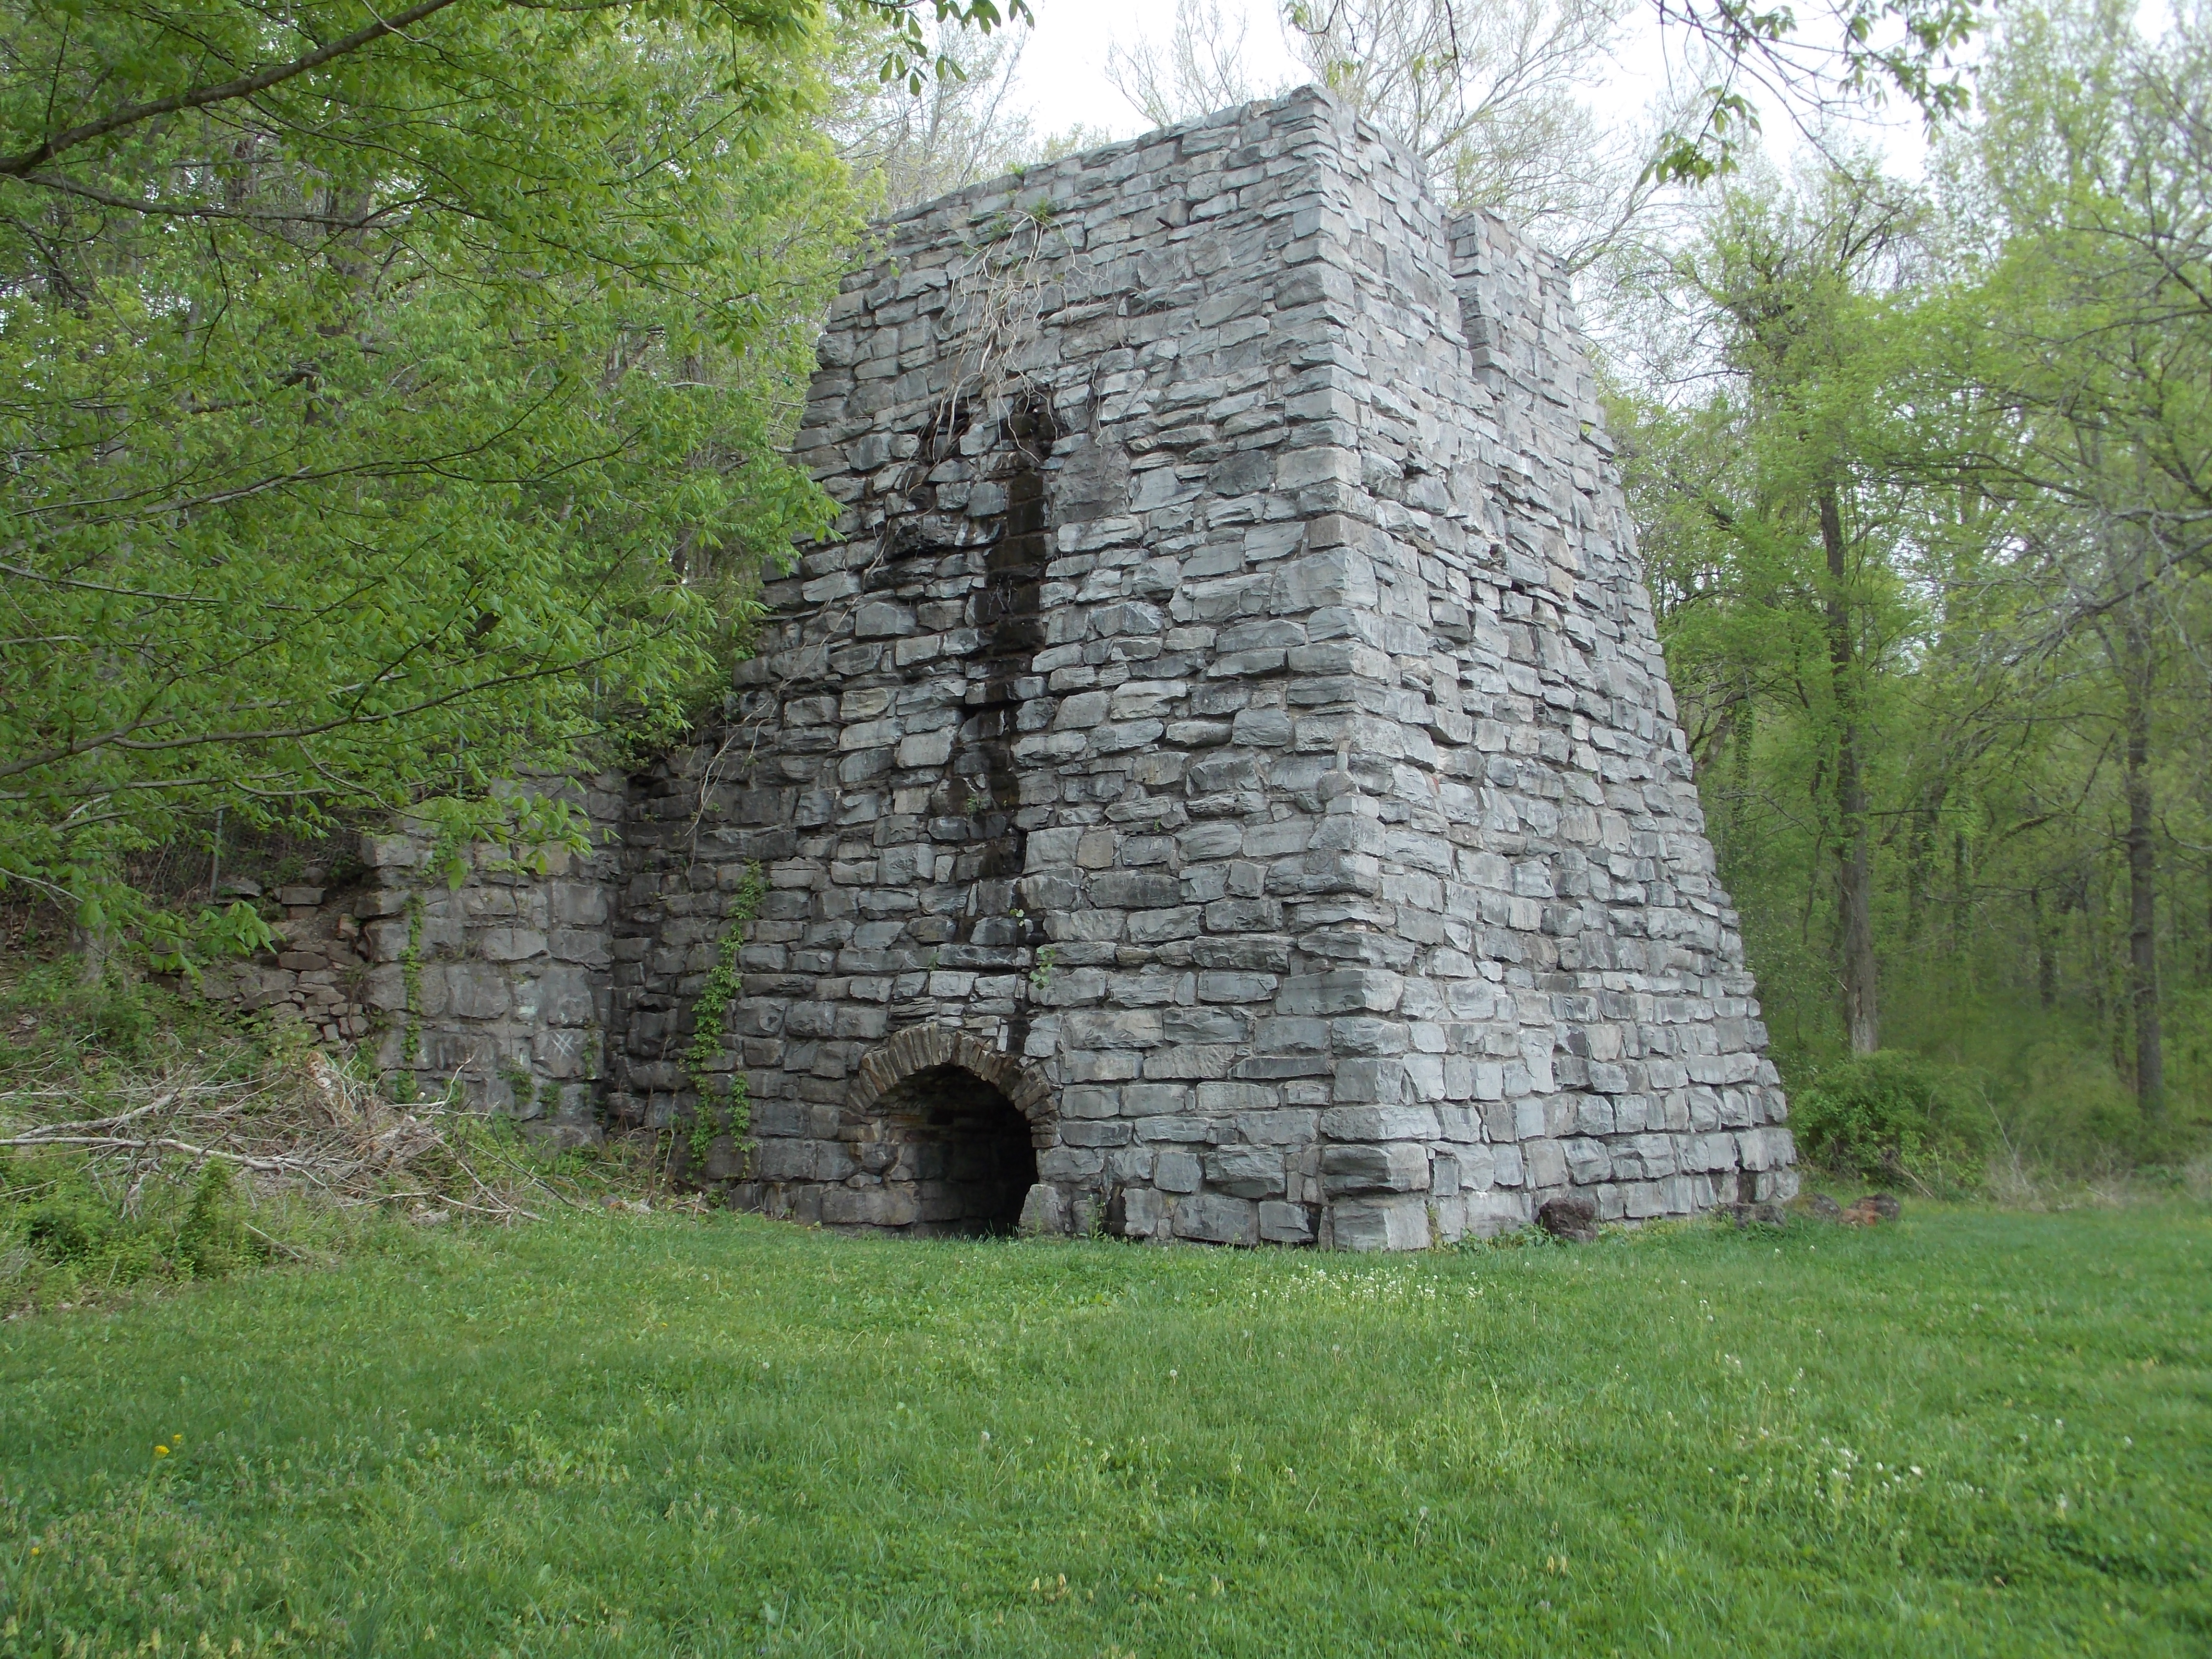 Illinois Iron Furnace, a one of a kind history in the Shawnee National Forest